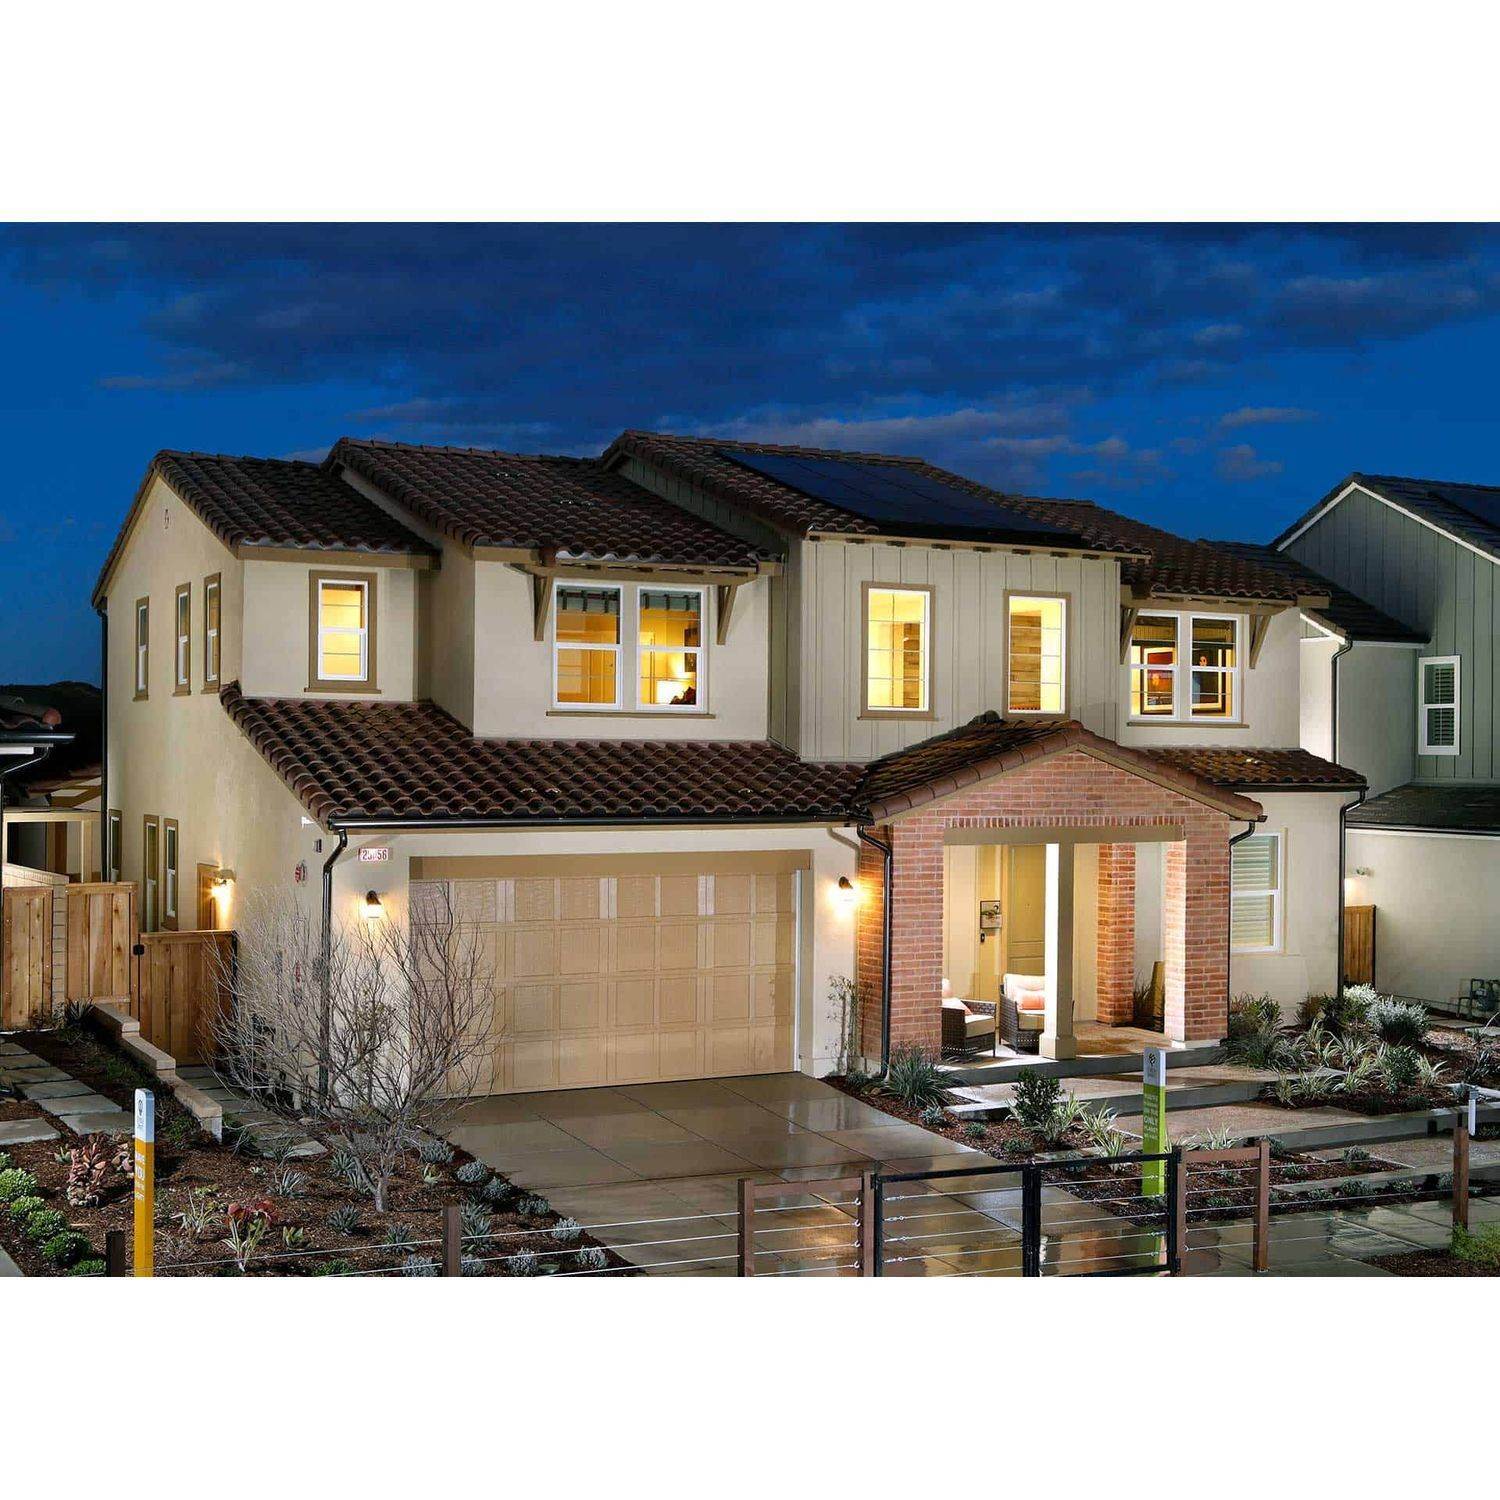 Single Family for Sale at The Cove At River Islands - Plan 2 2799 Orion Court LATHROP, CALIFORNIA 95330 UNITED STATES